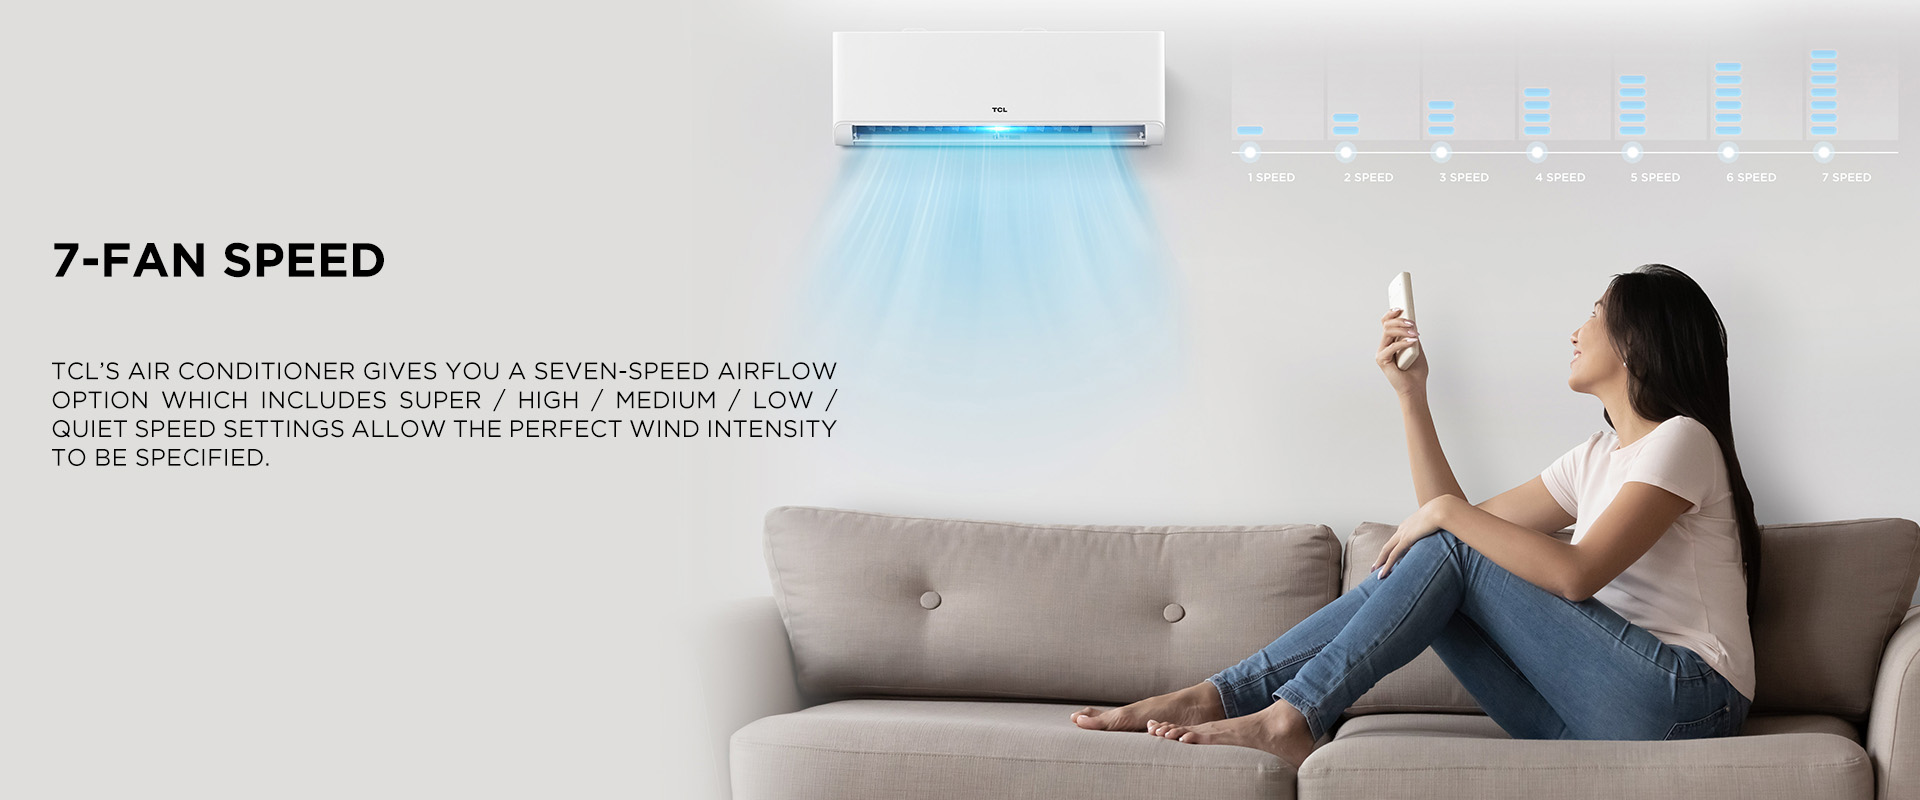 TCL’S Air Conditioner gives you a SEVEN-speed airflow option which includes Super / High / Medium / Low / Quiet speed settings allow the perfect wind intensity to be specified.